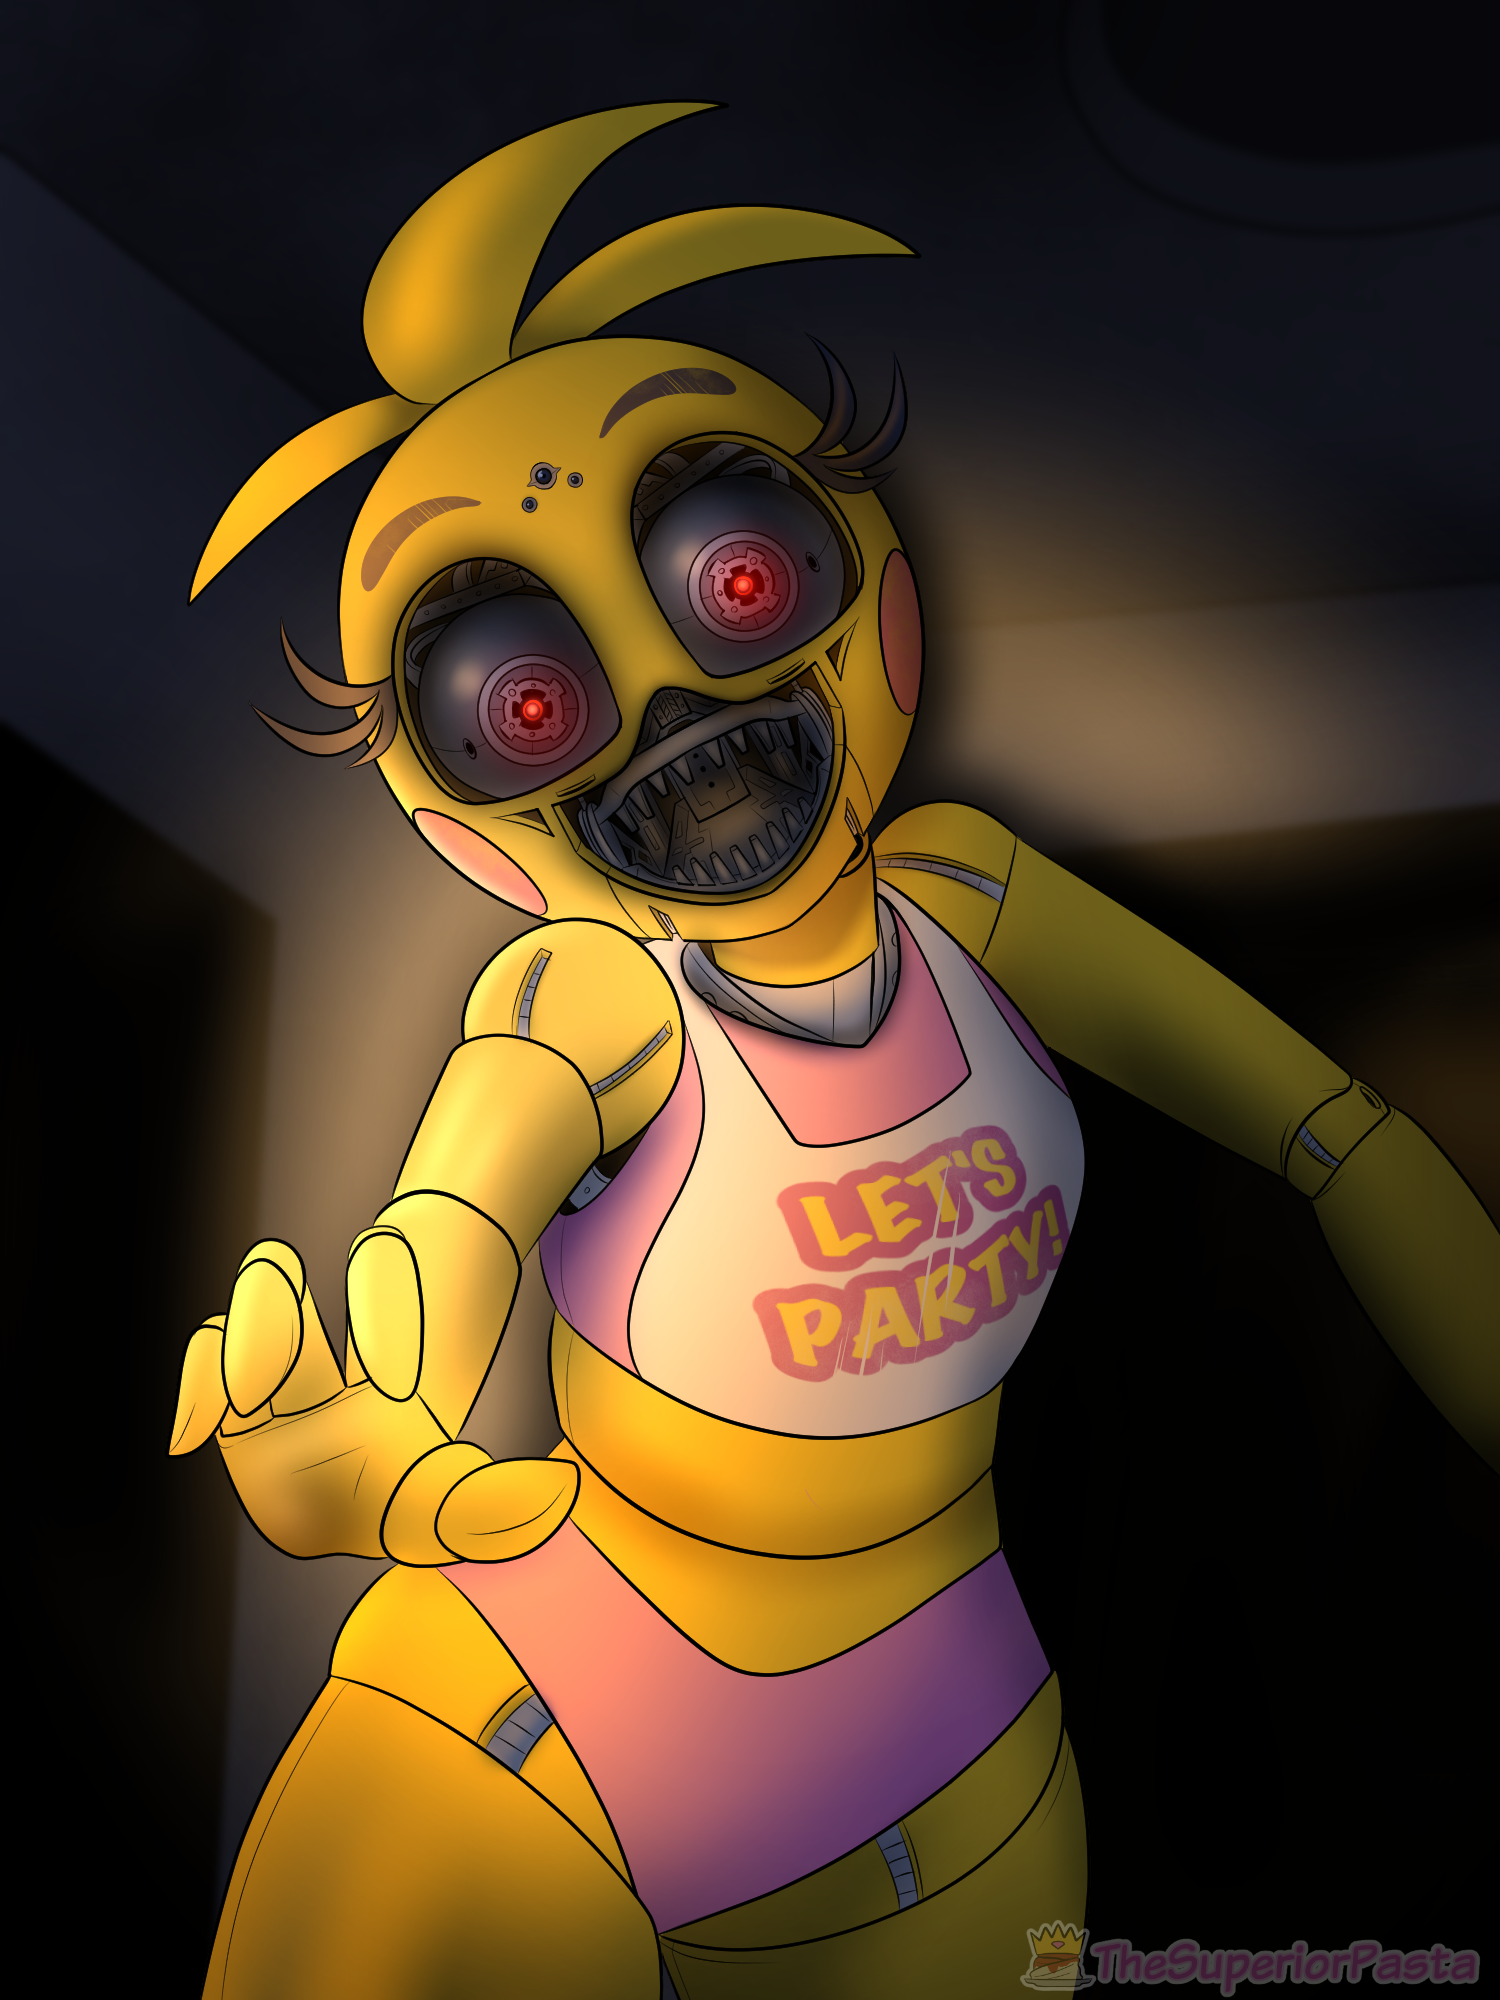 FNAF4 Night 1 Minigame by Staalone on DeviantArt